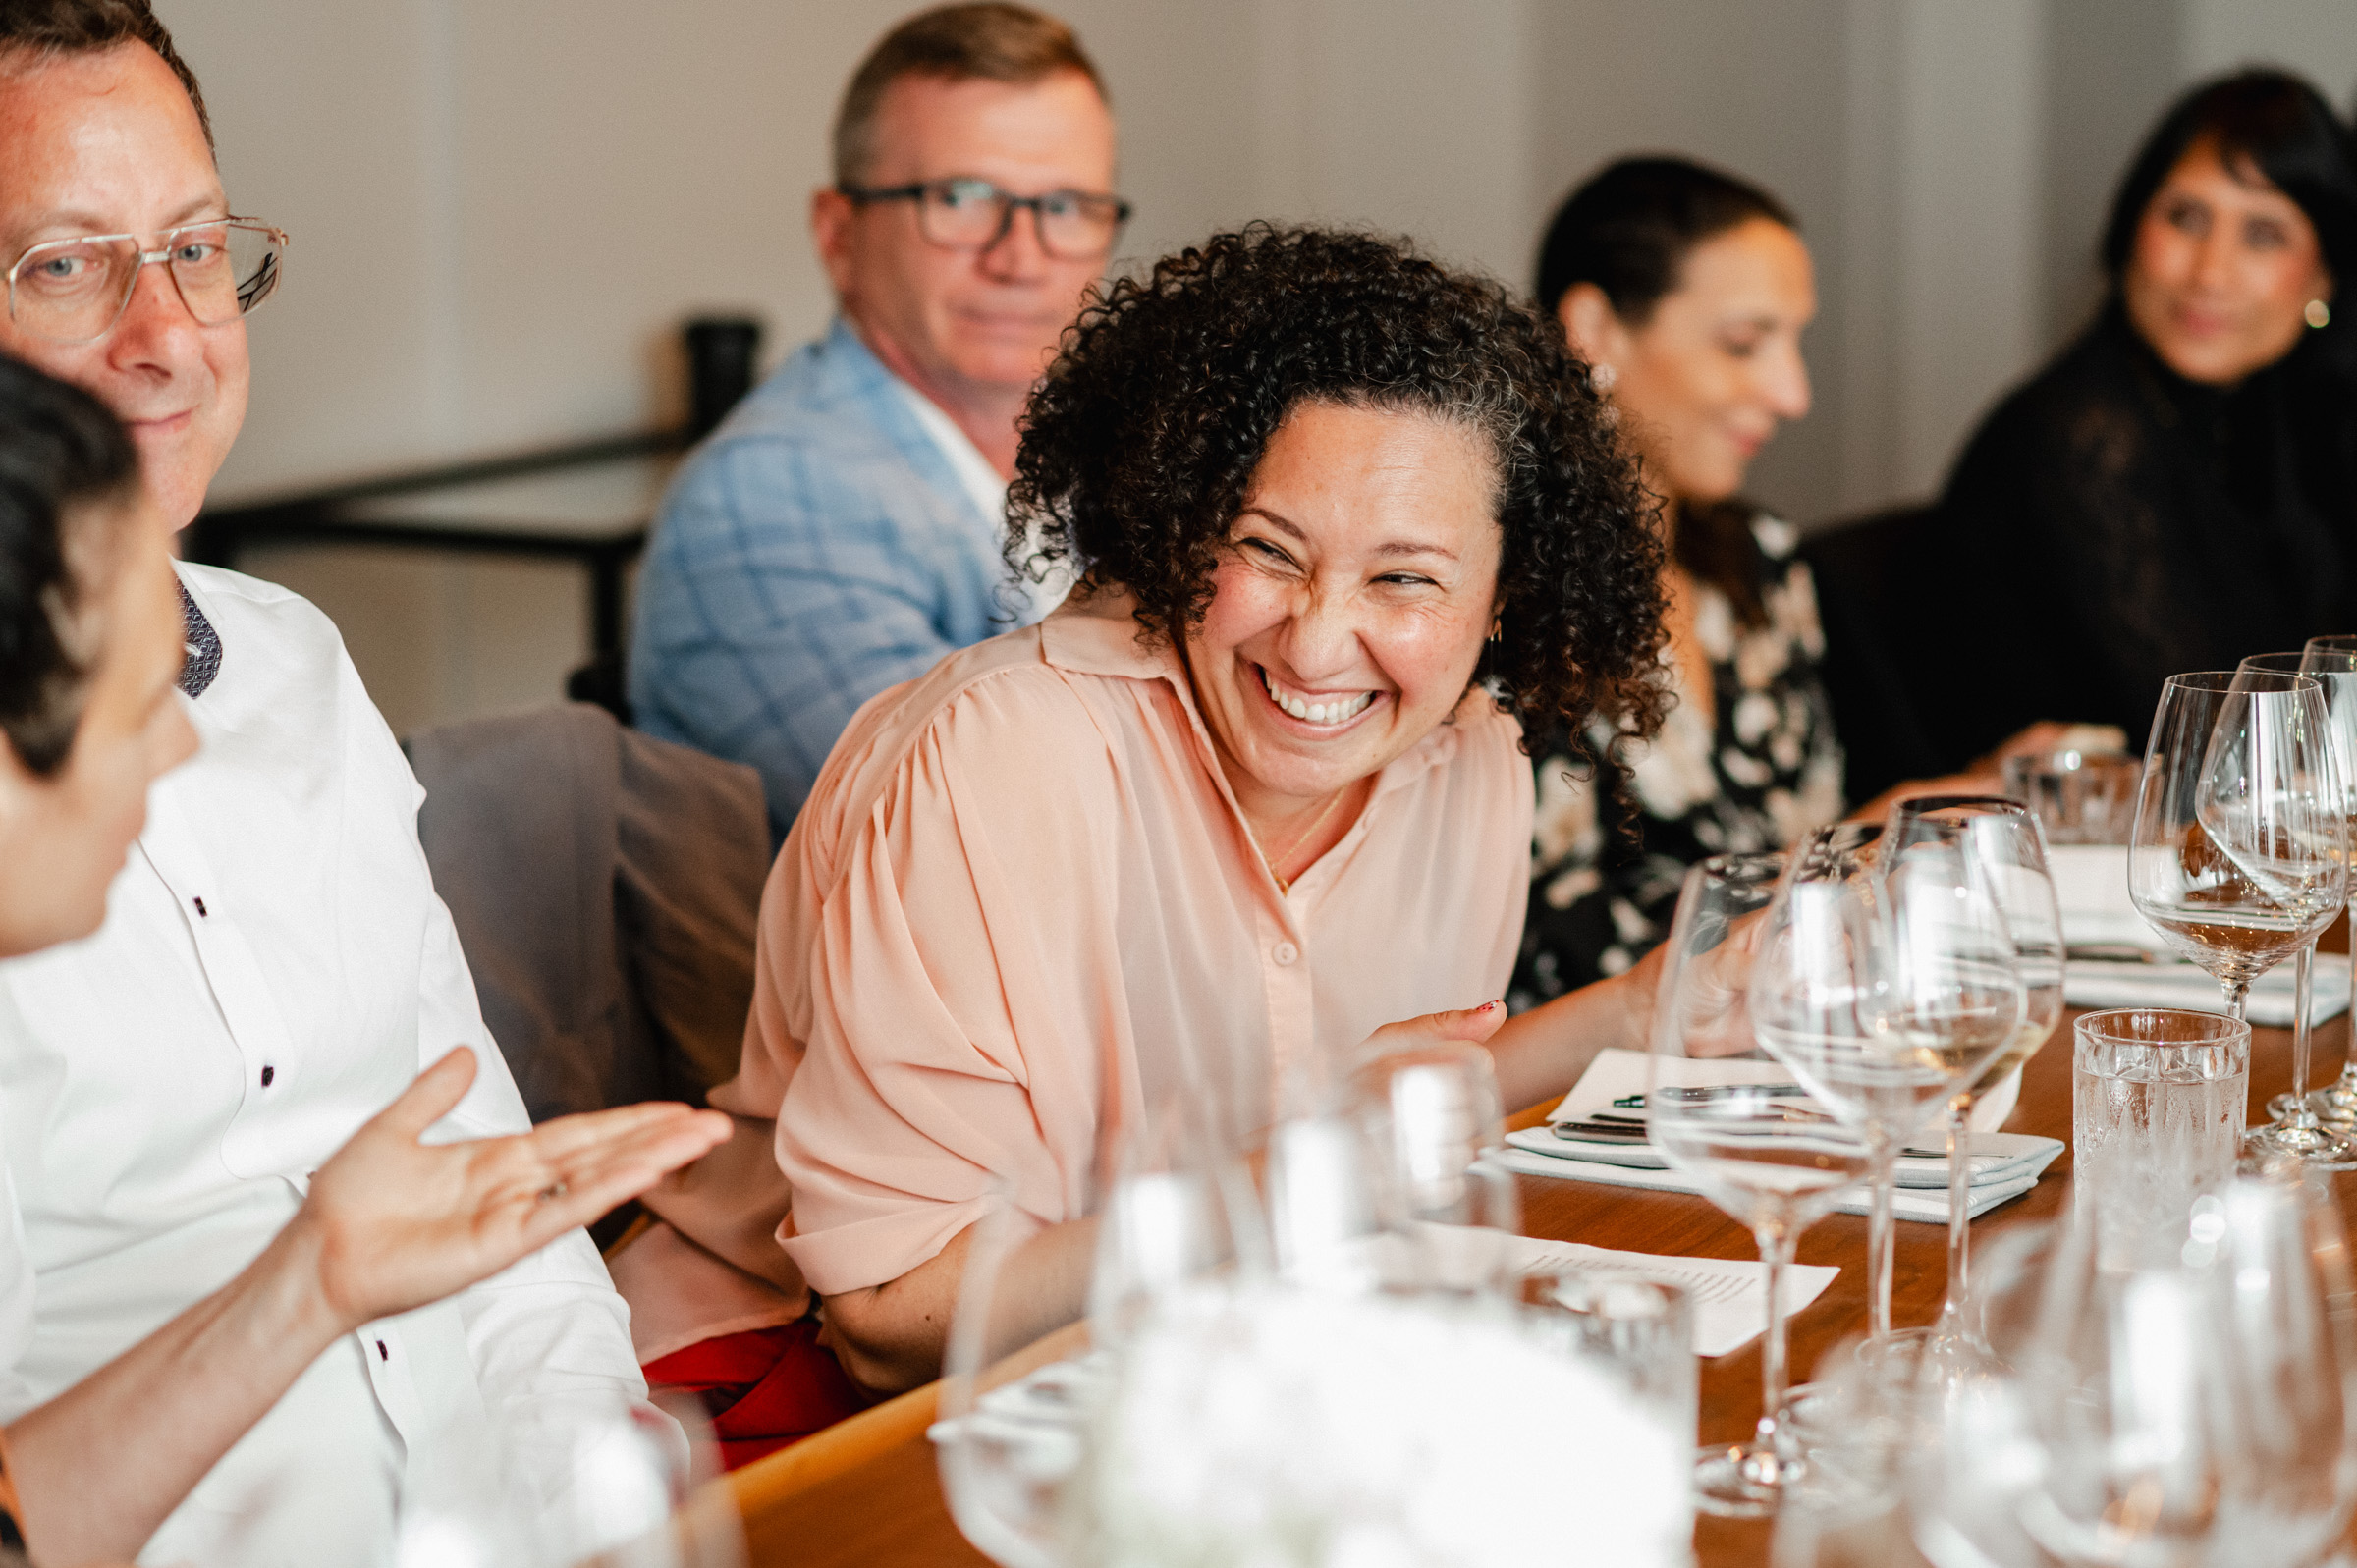 A group of people sits around a table, including a woman with curly hair laughing. Several wine glasses and plates adorn the table, capturing the essence of joyful moments typically seen in event photography. Others are looking in different directions.